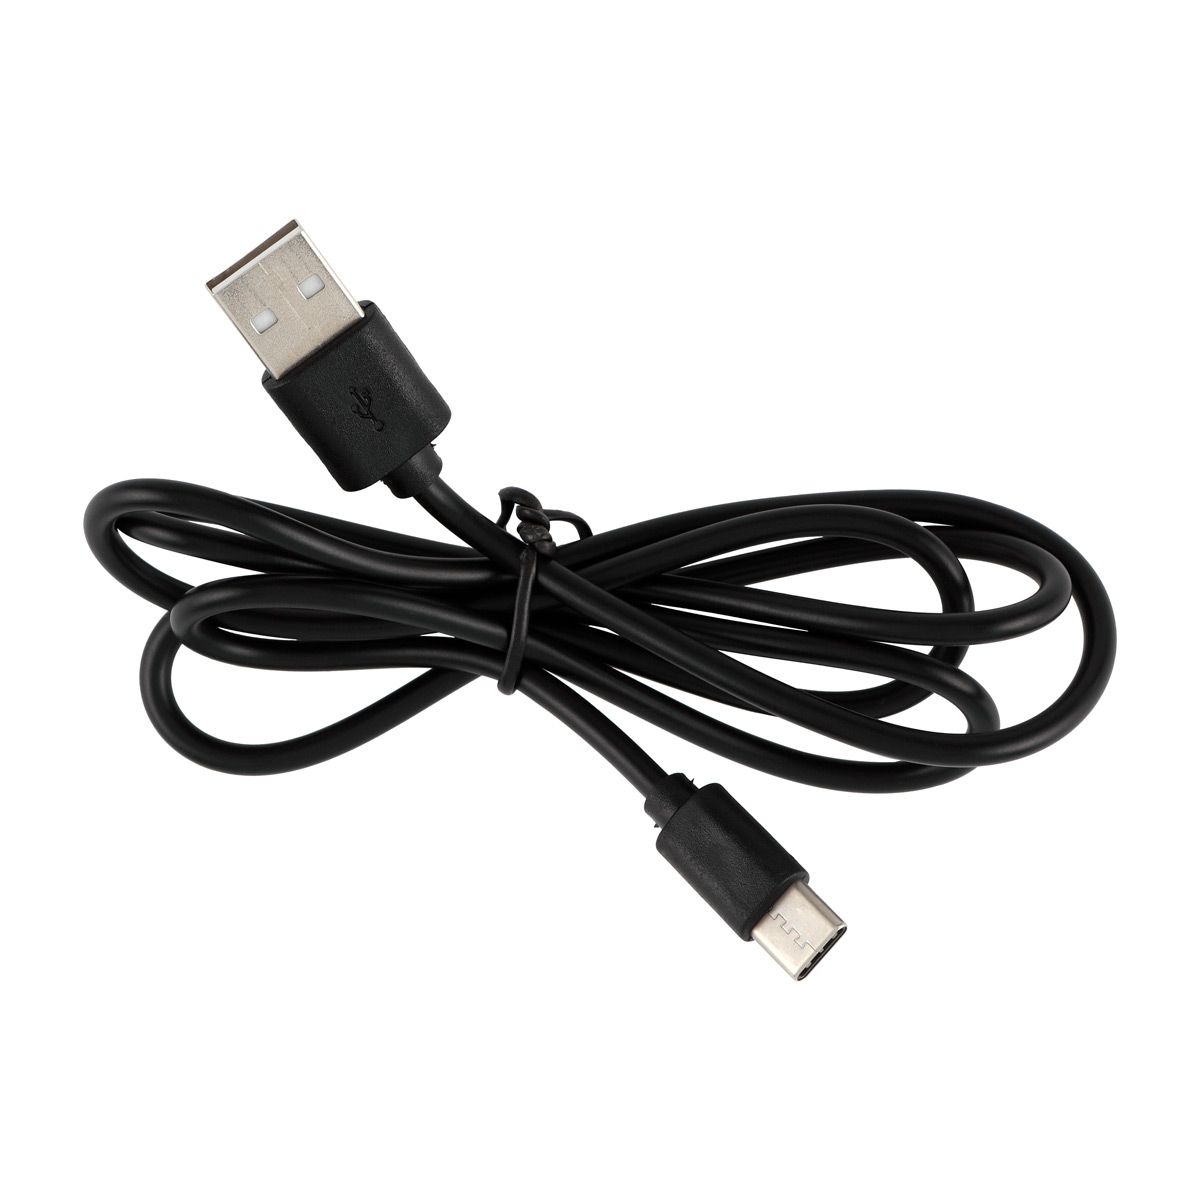 USB cable included